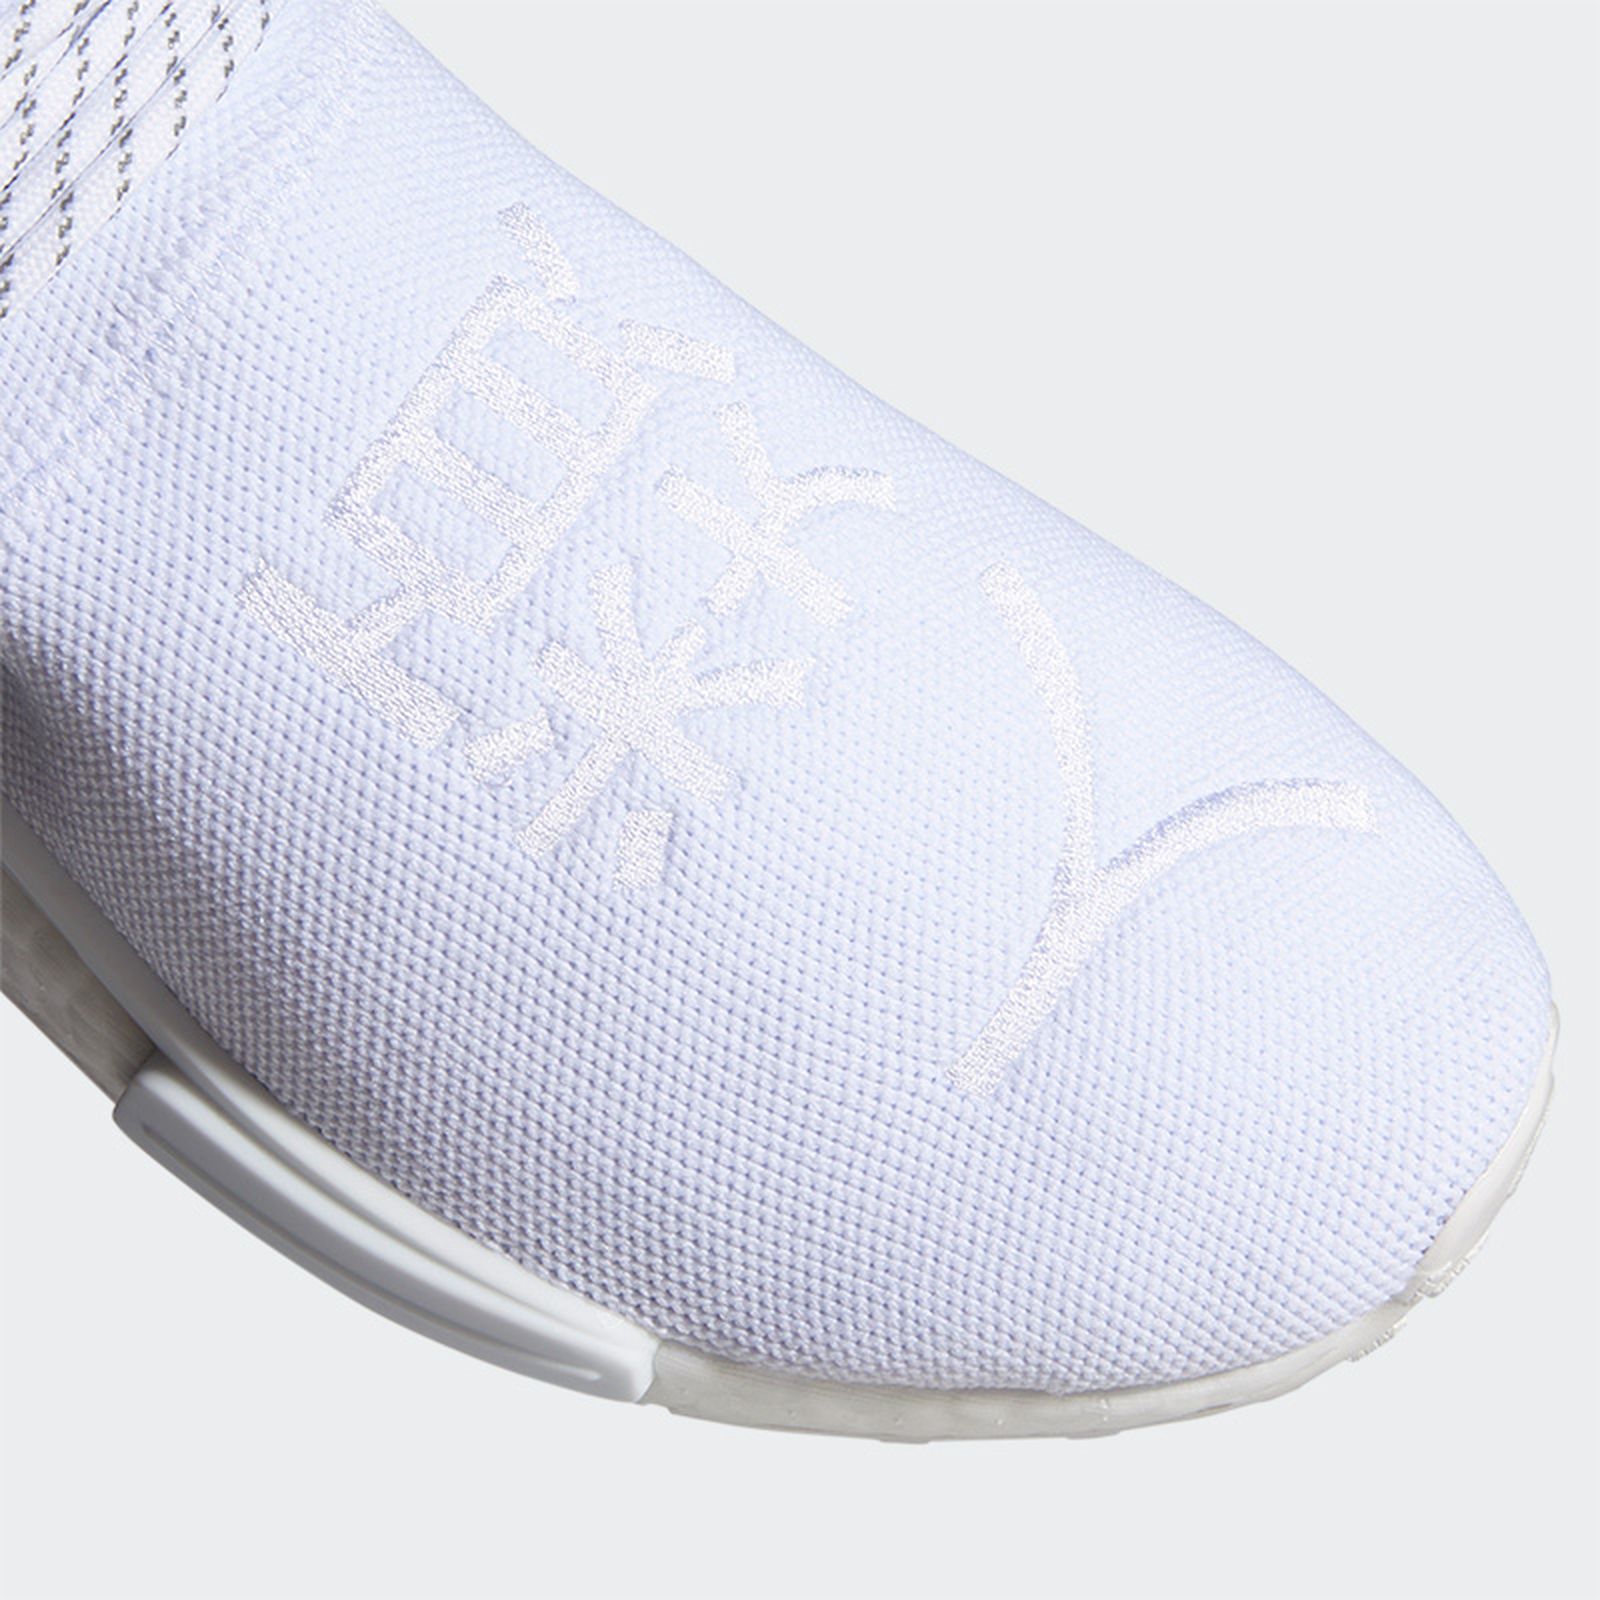 Pharrell Williams adidas Hu NMD White: Official Images & Info